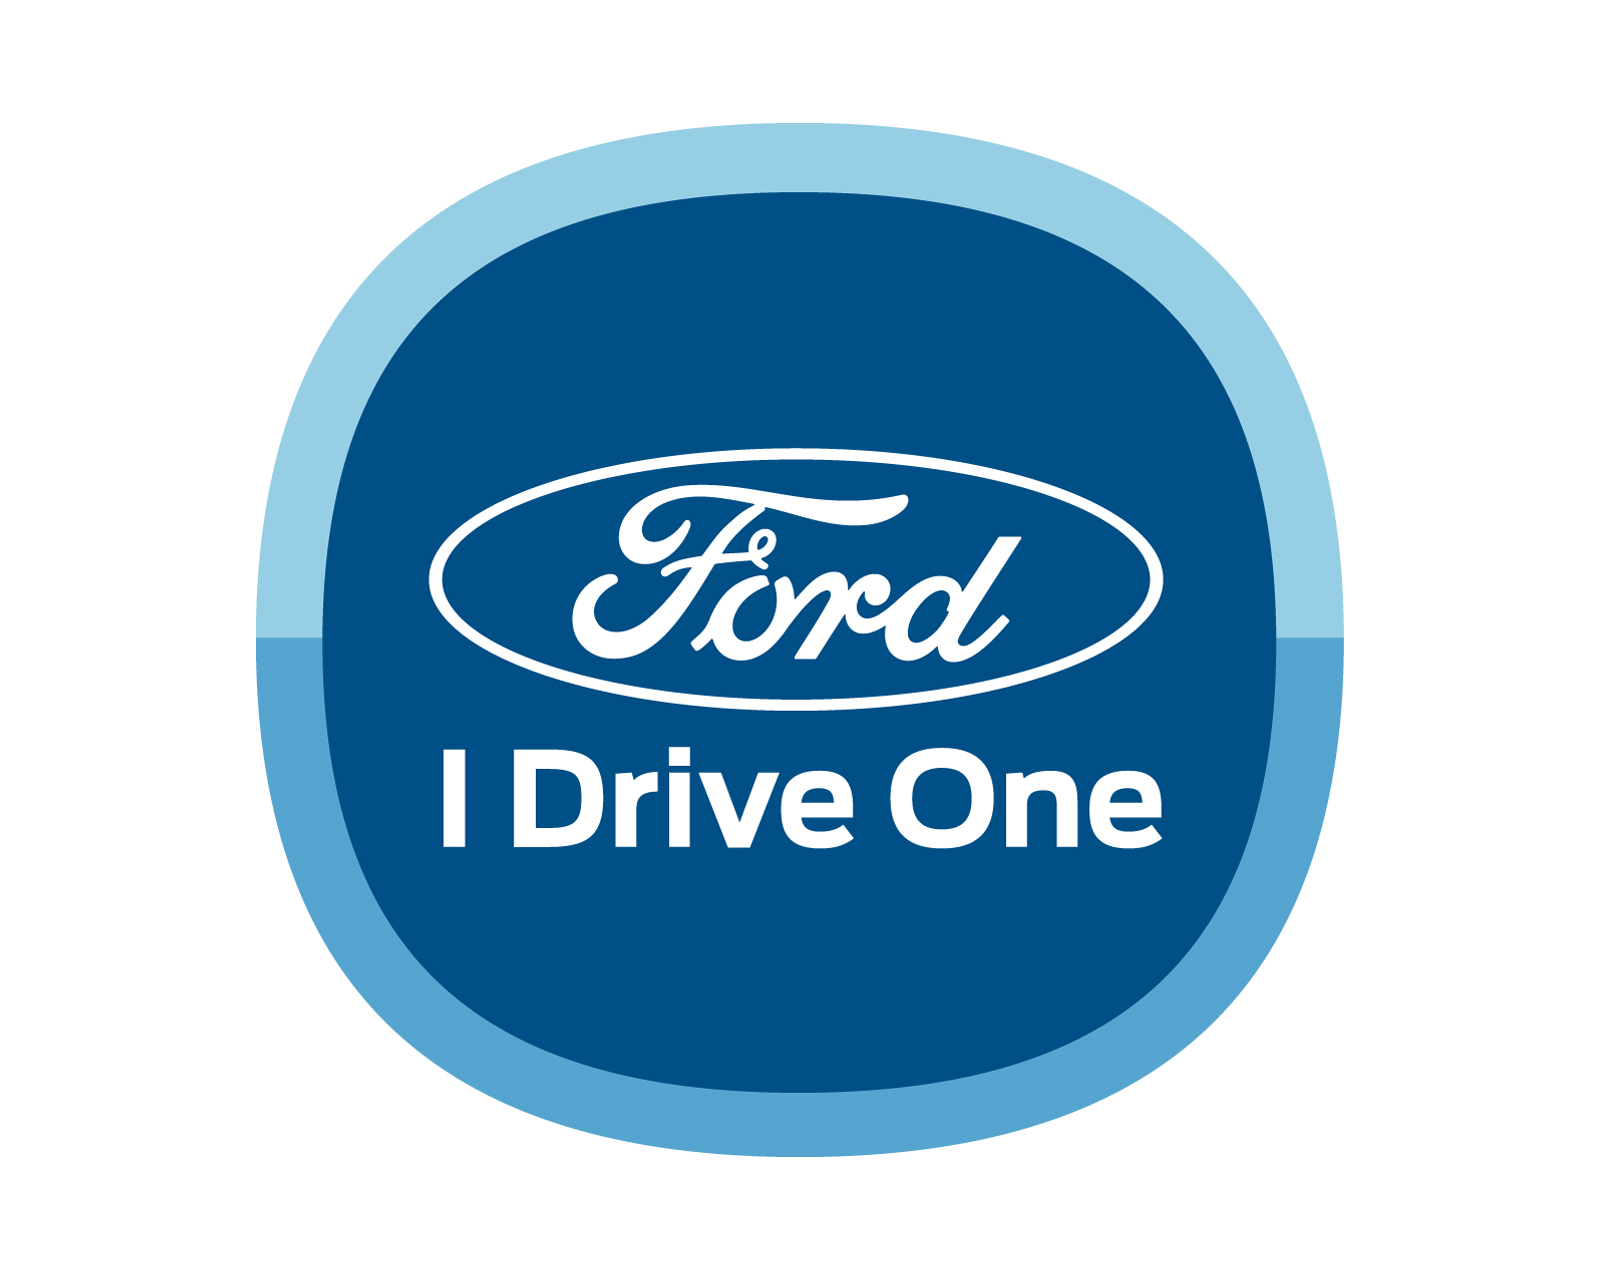 Ford Fan. Issue company